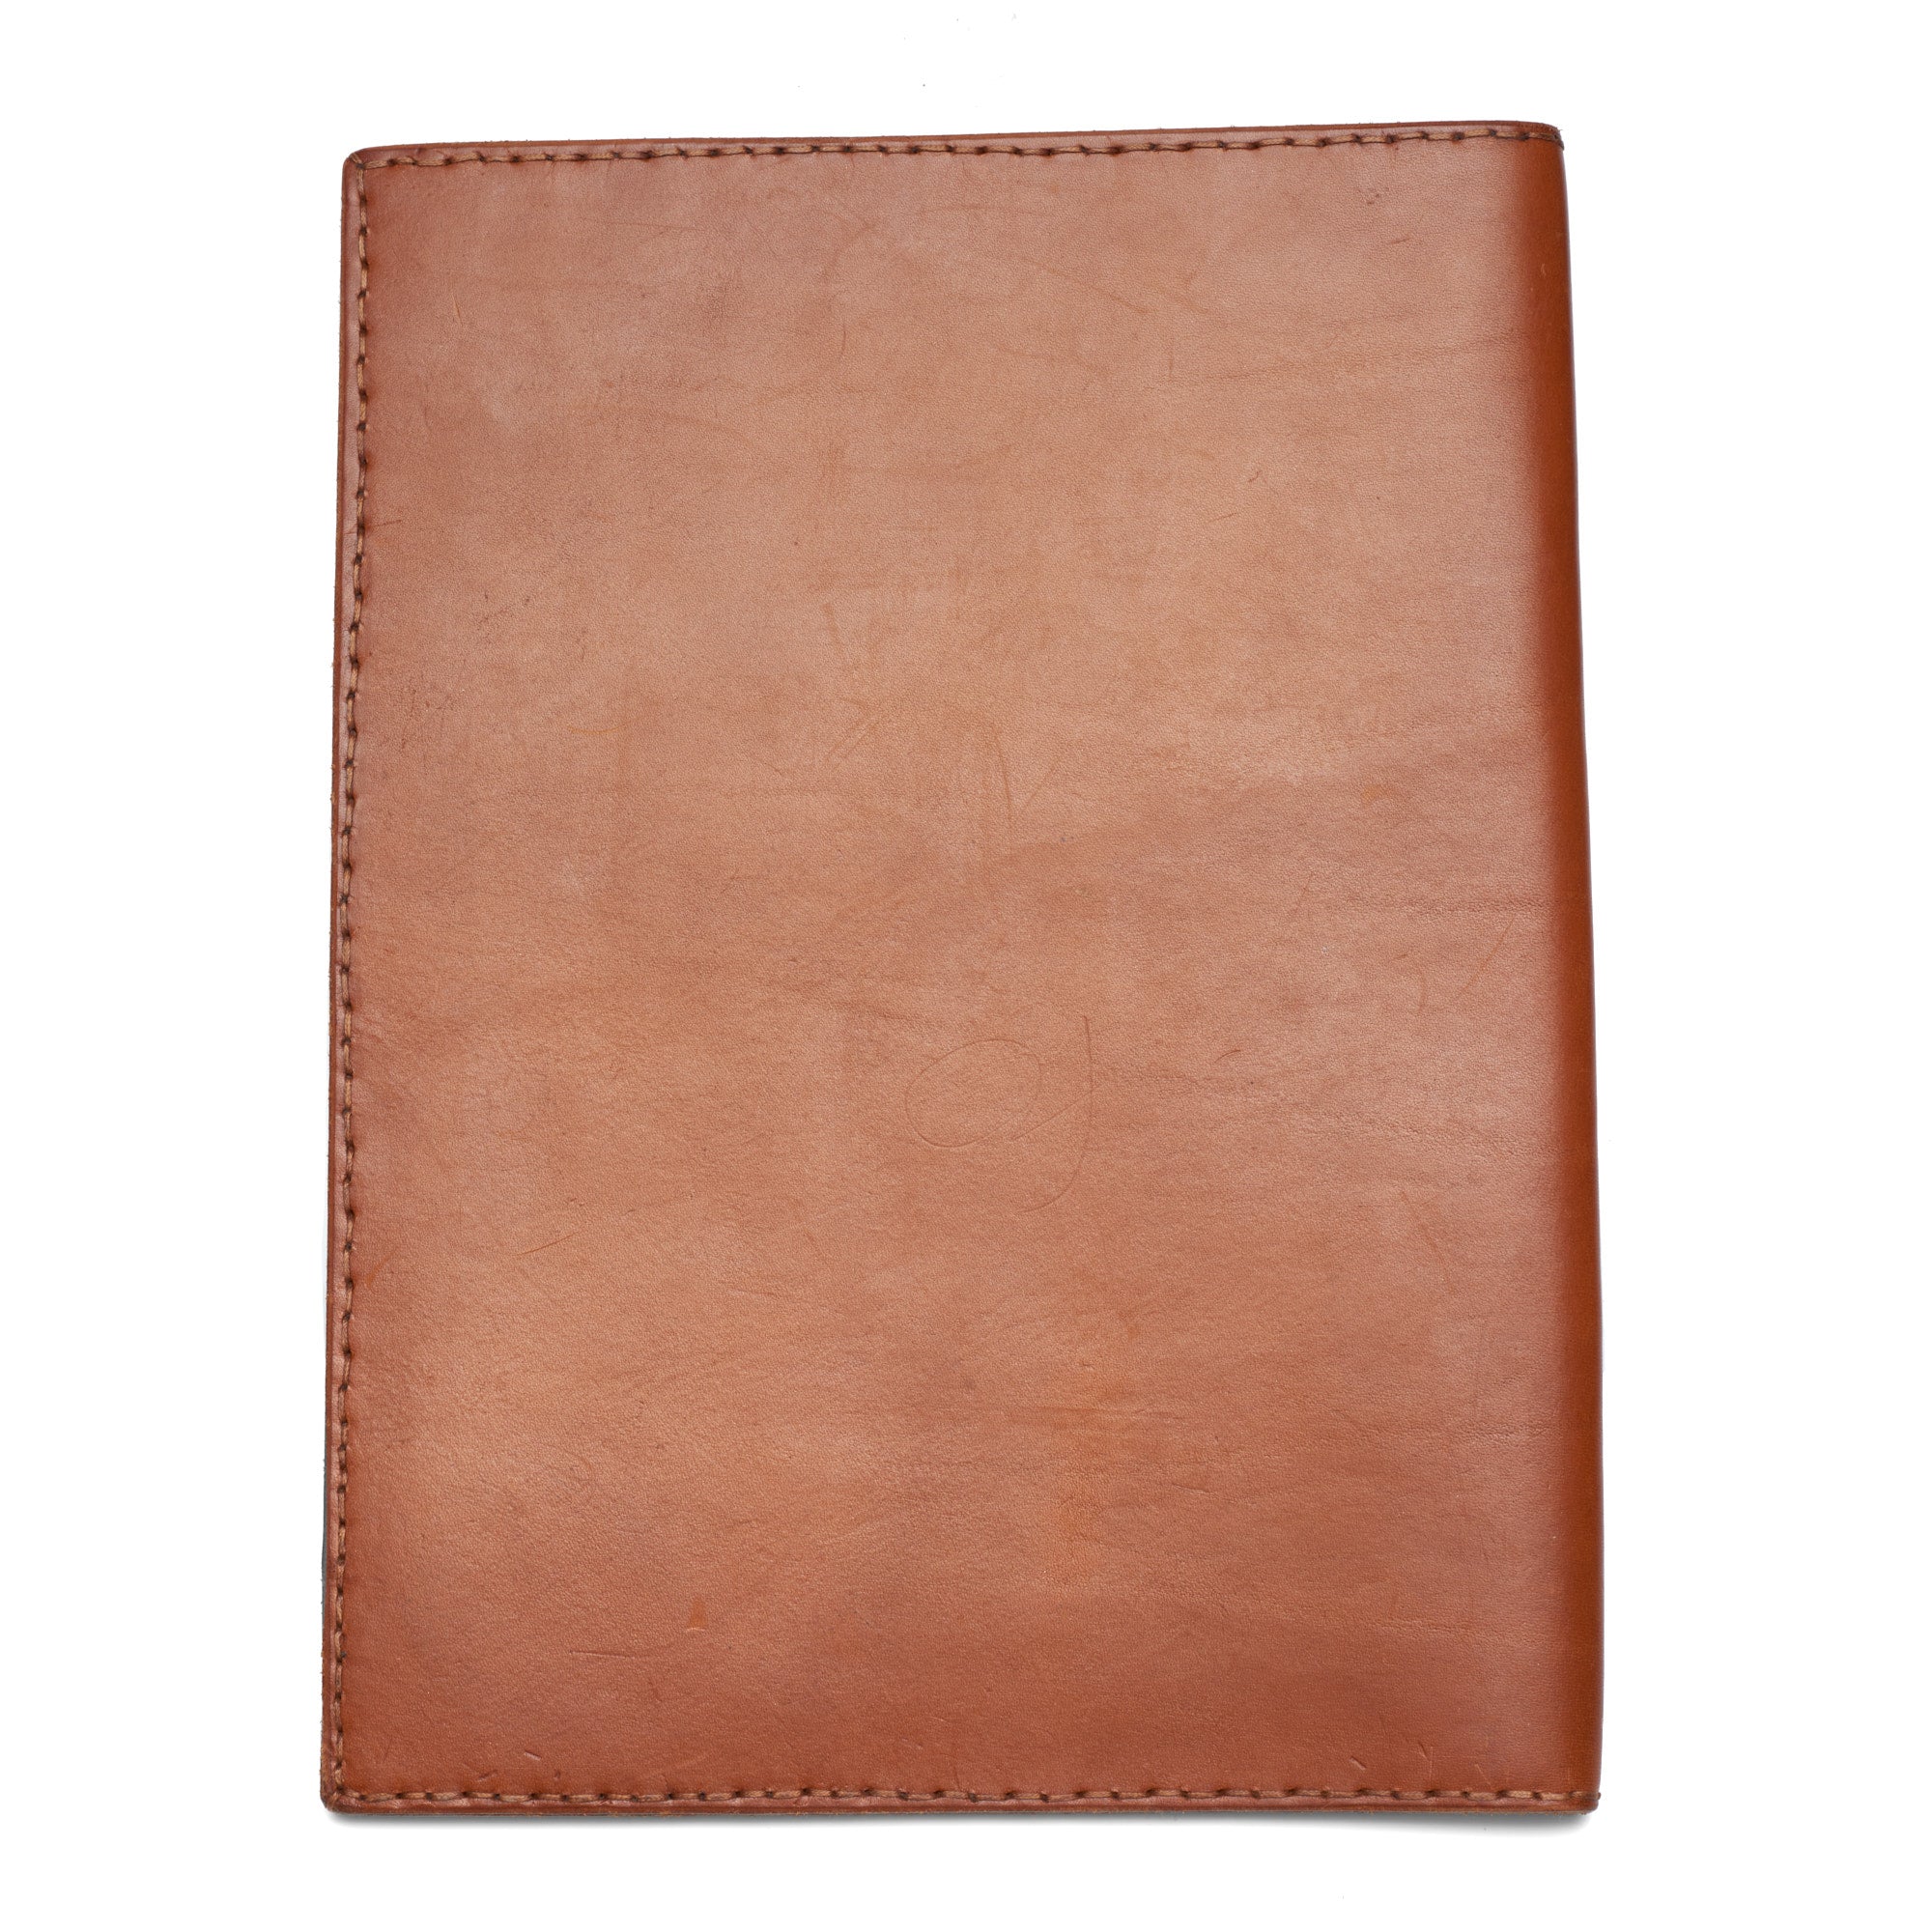 OLD HIDE ROMANELLI Cowhide Leather Notepad Cover Folio 32x24